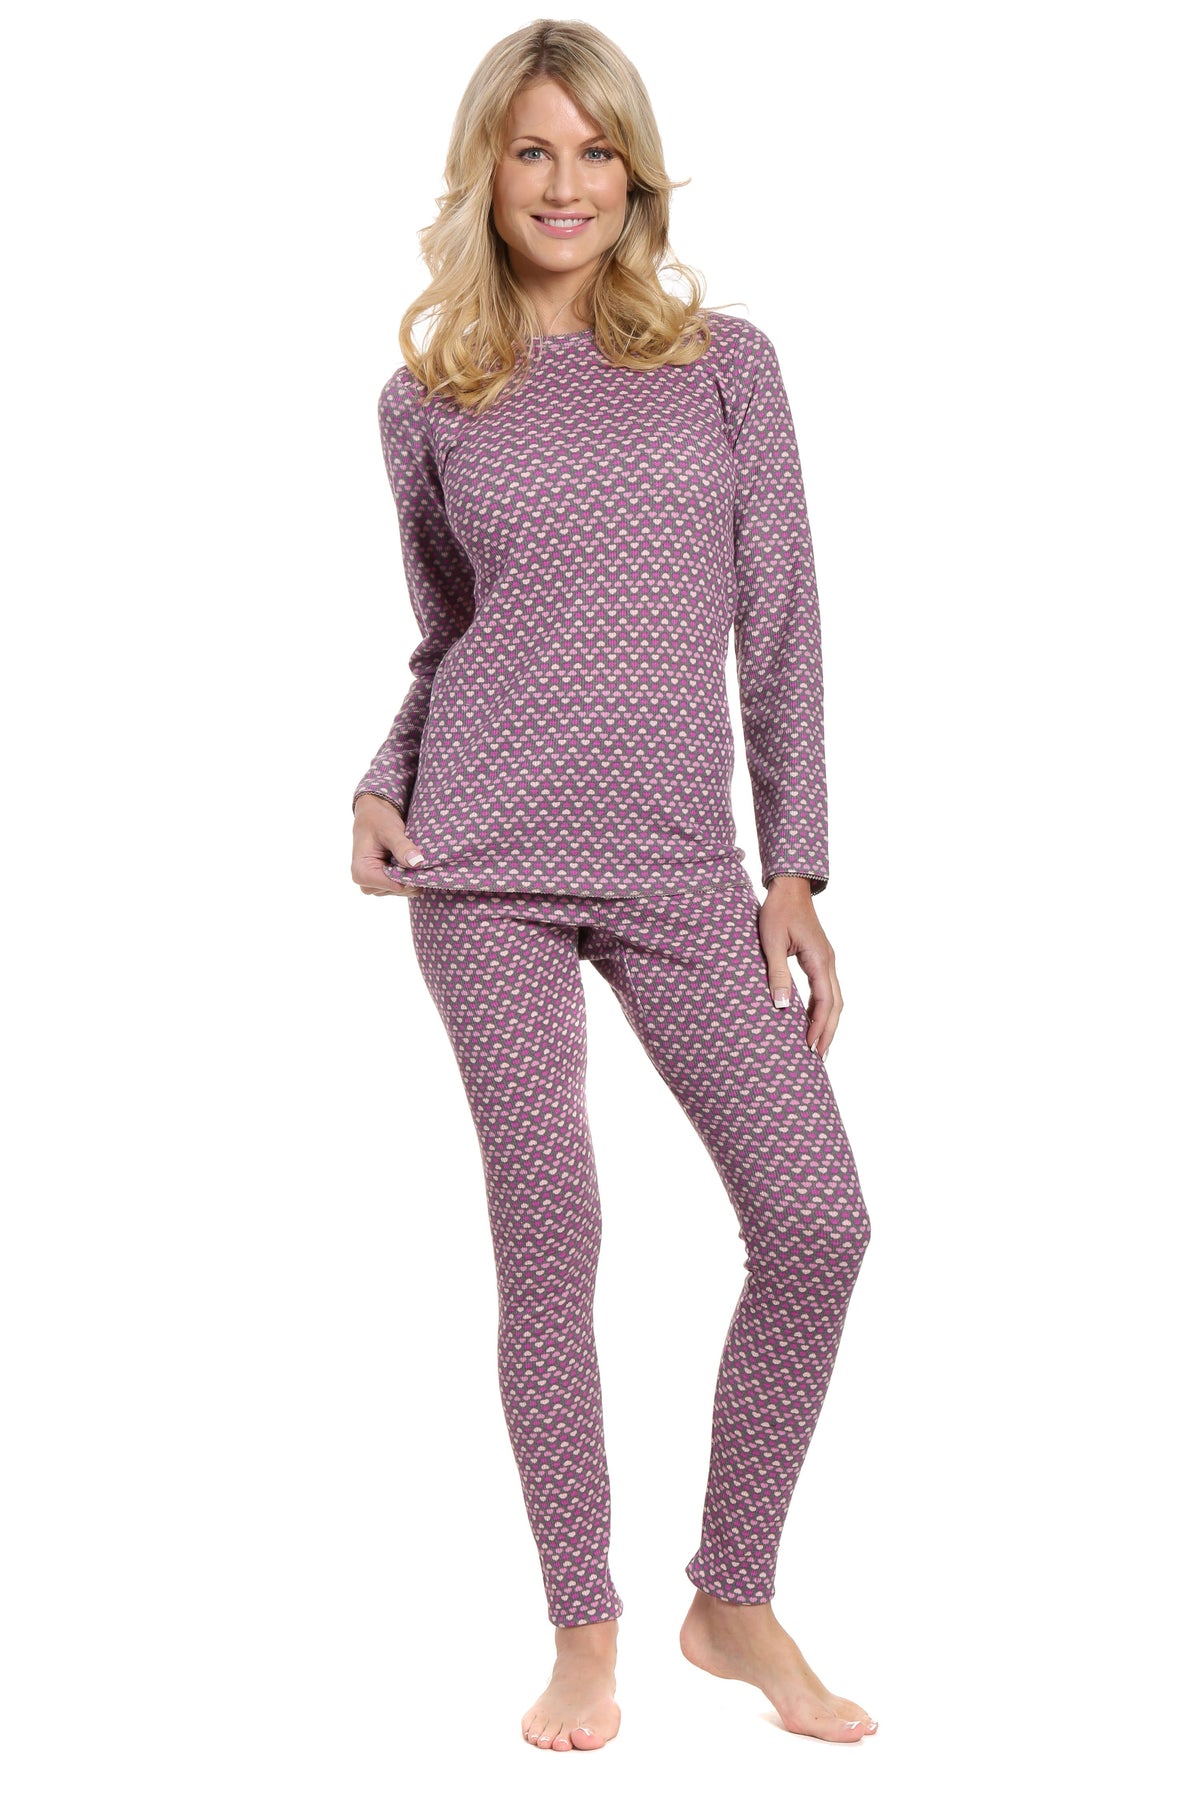 Womens Printed Extreme Cold Waffle Knit Thermal Top and Bottom Set - Hearts Multi Charcoal/Pink